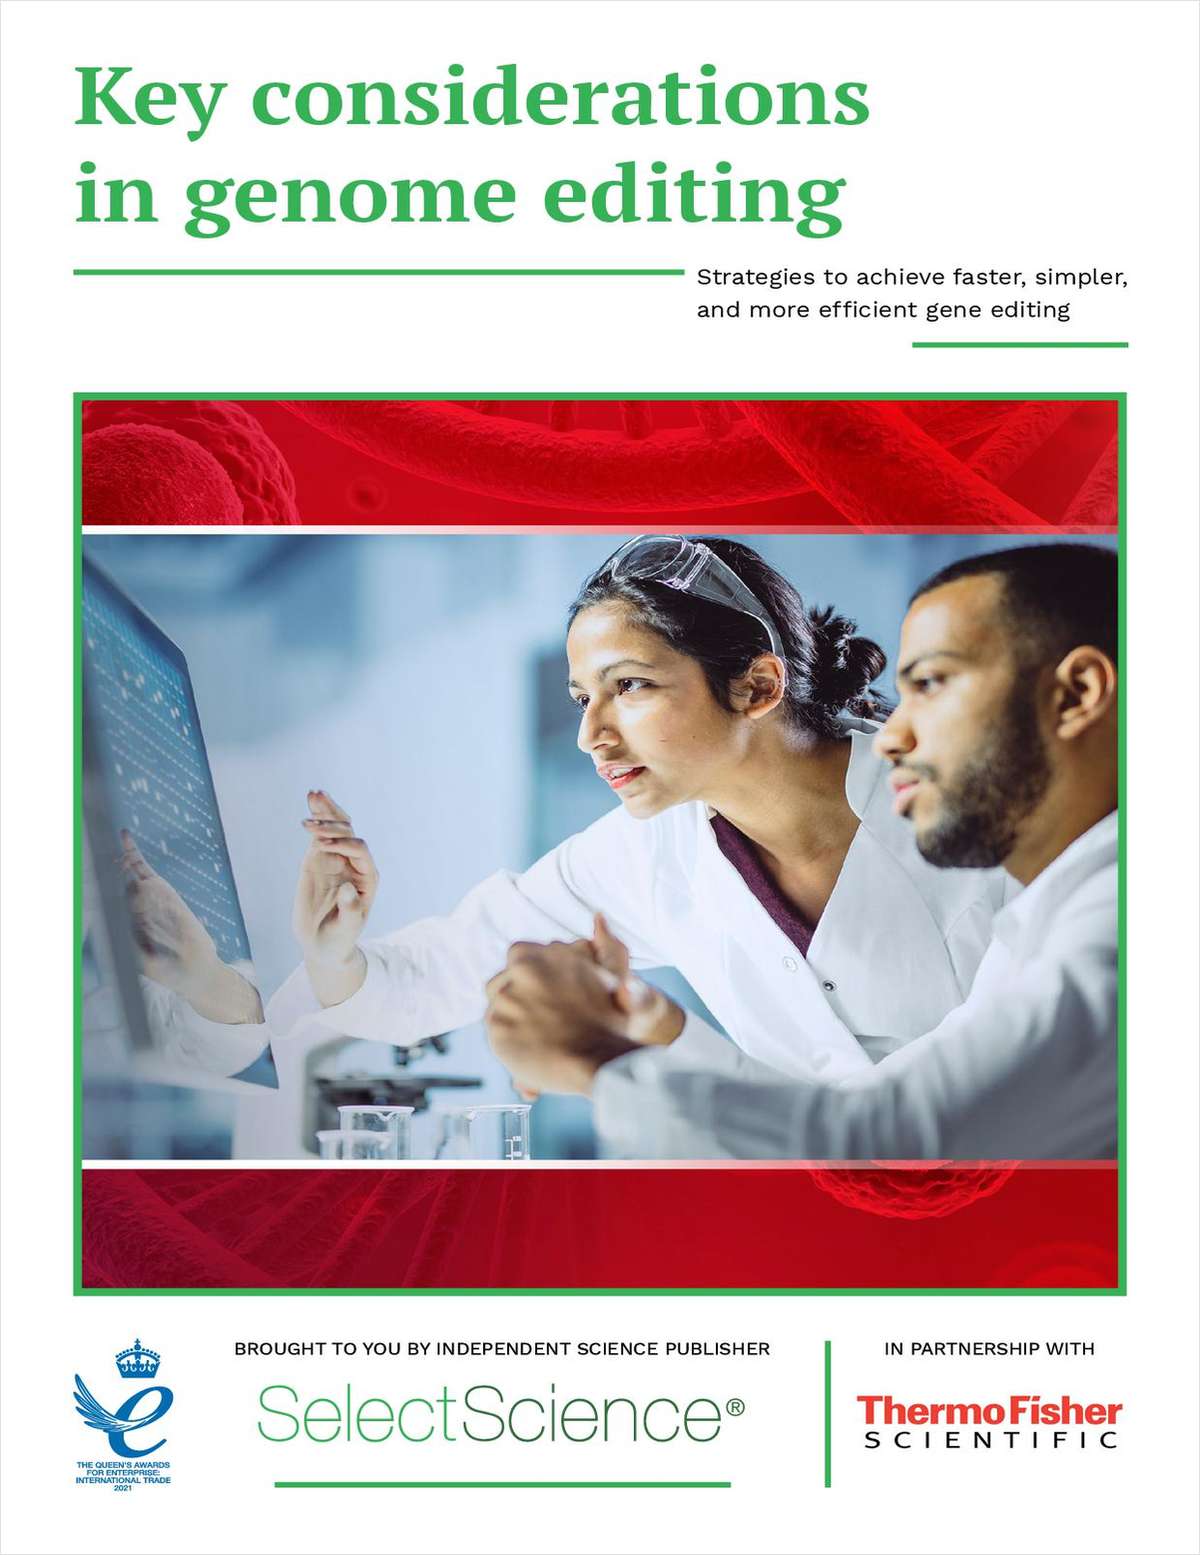 Key Considerations in Genome Editing